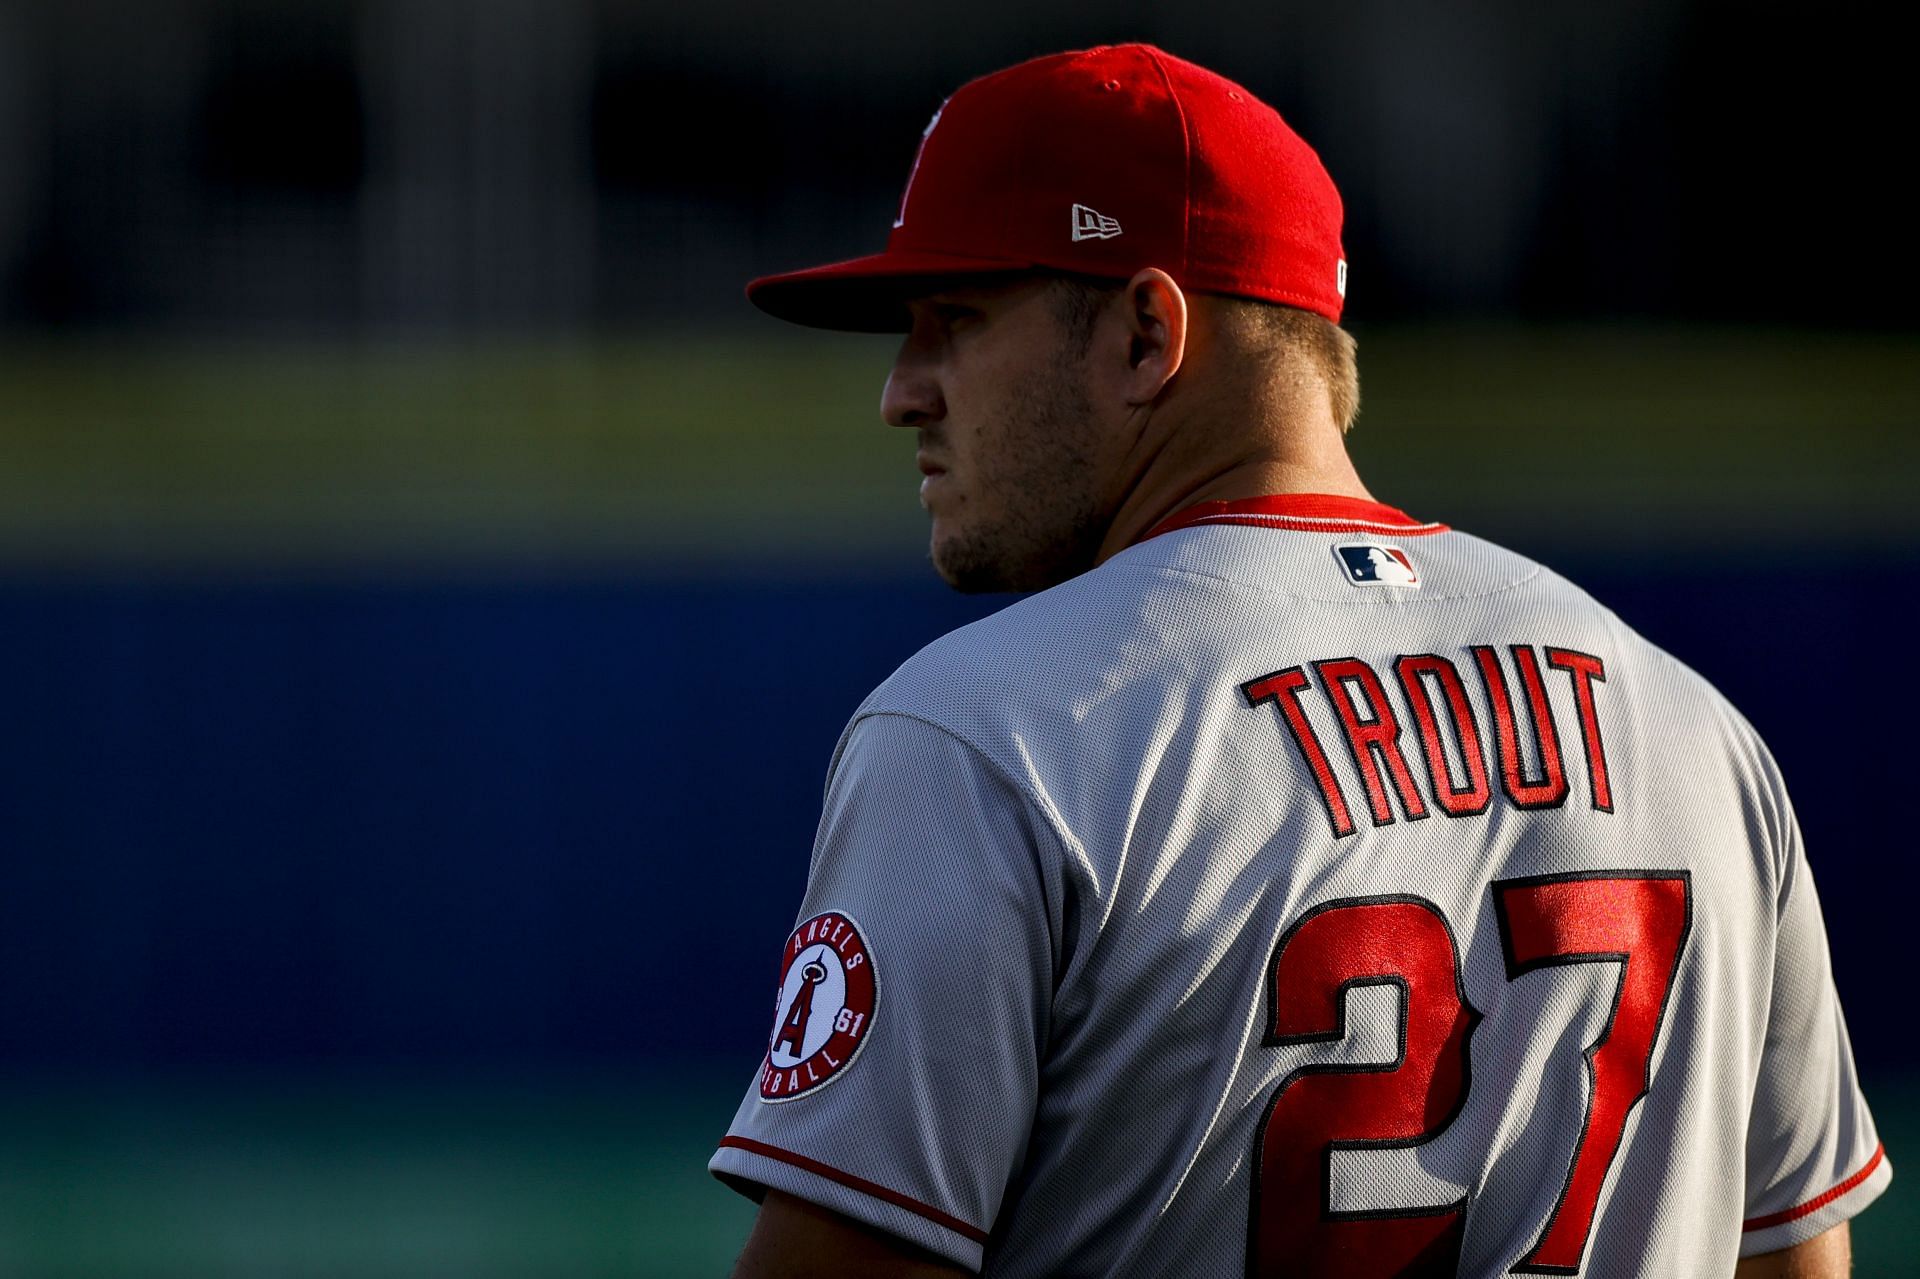 Looks like MLB star Mike Trout is spending his offseason honing